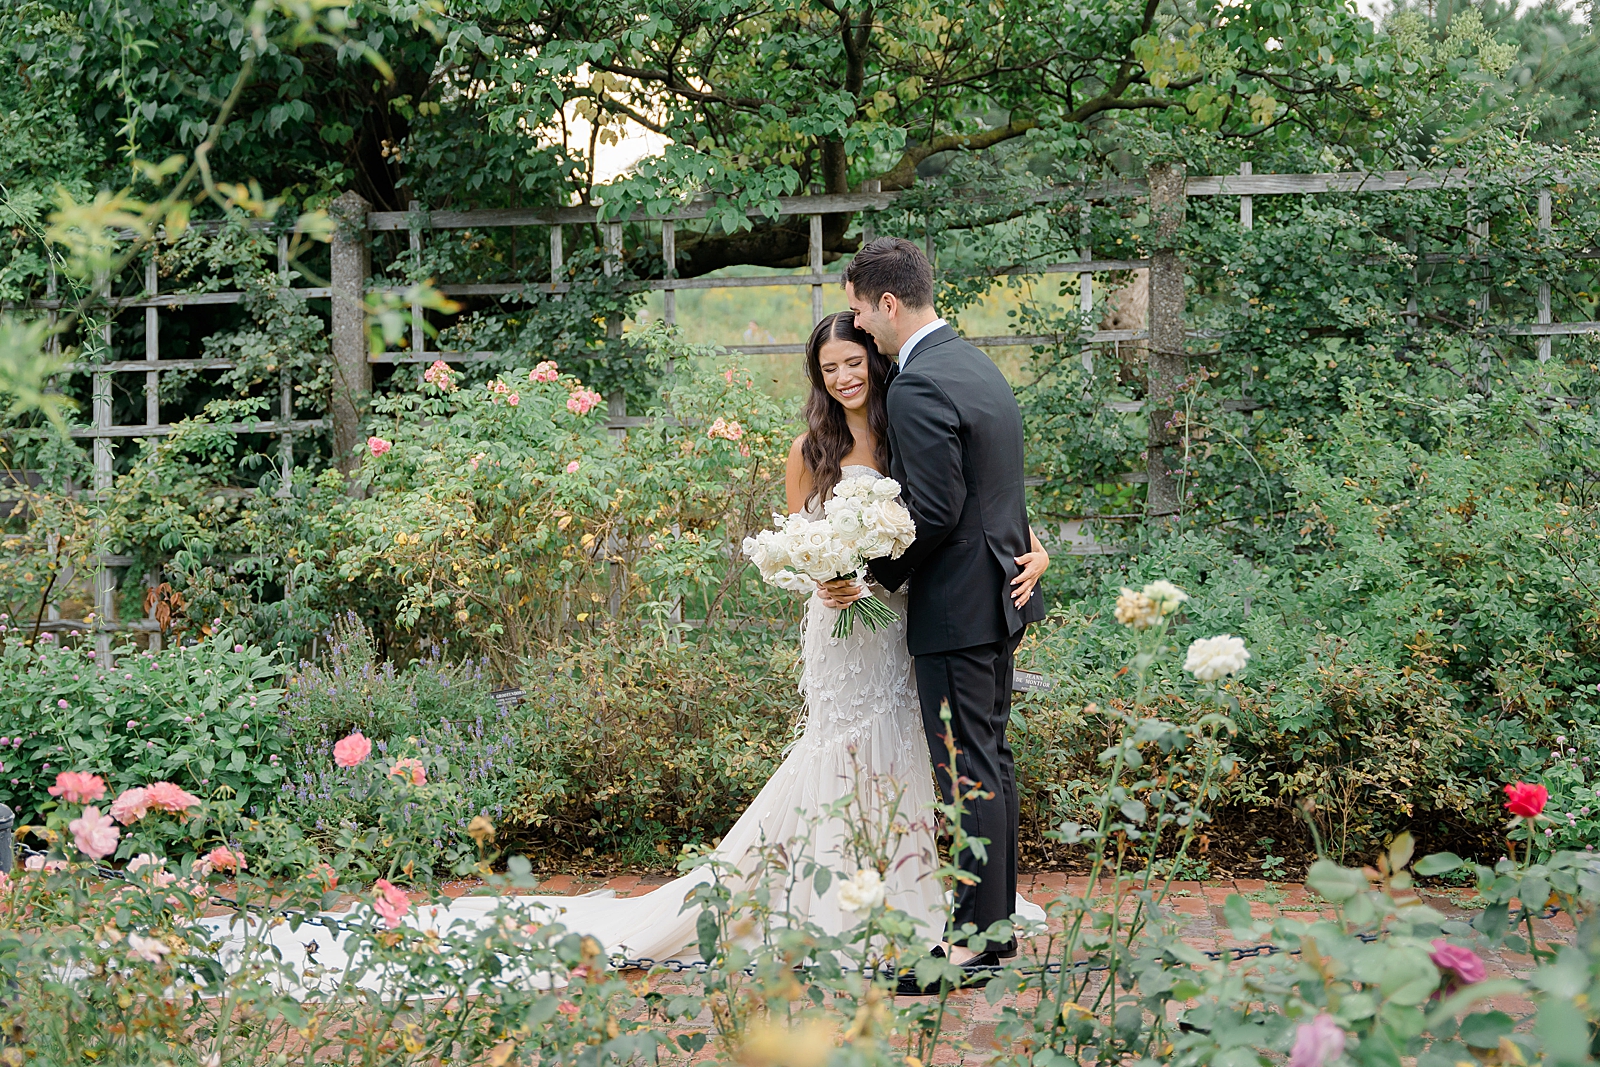 Shot of the bride and groom embracing in a garden. 